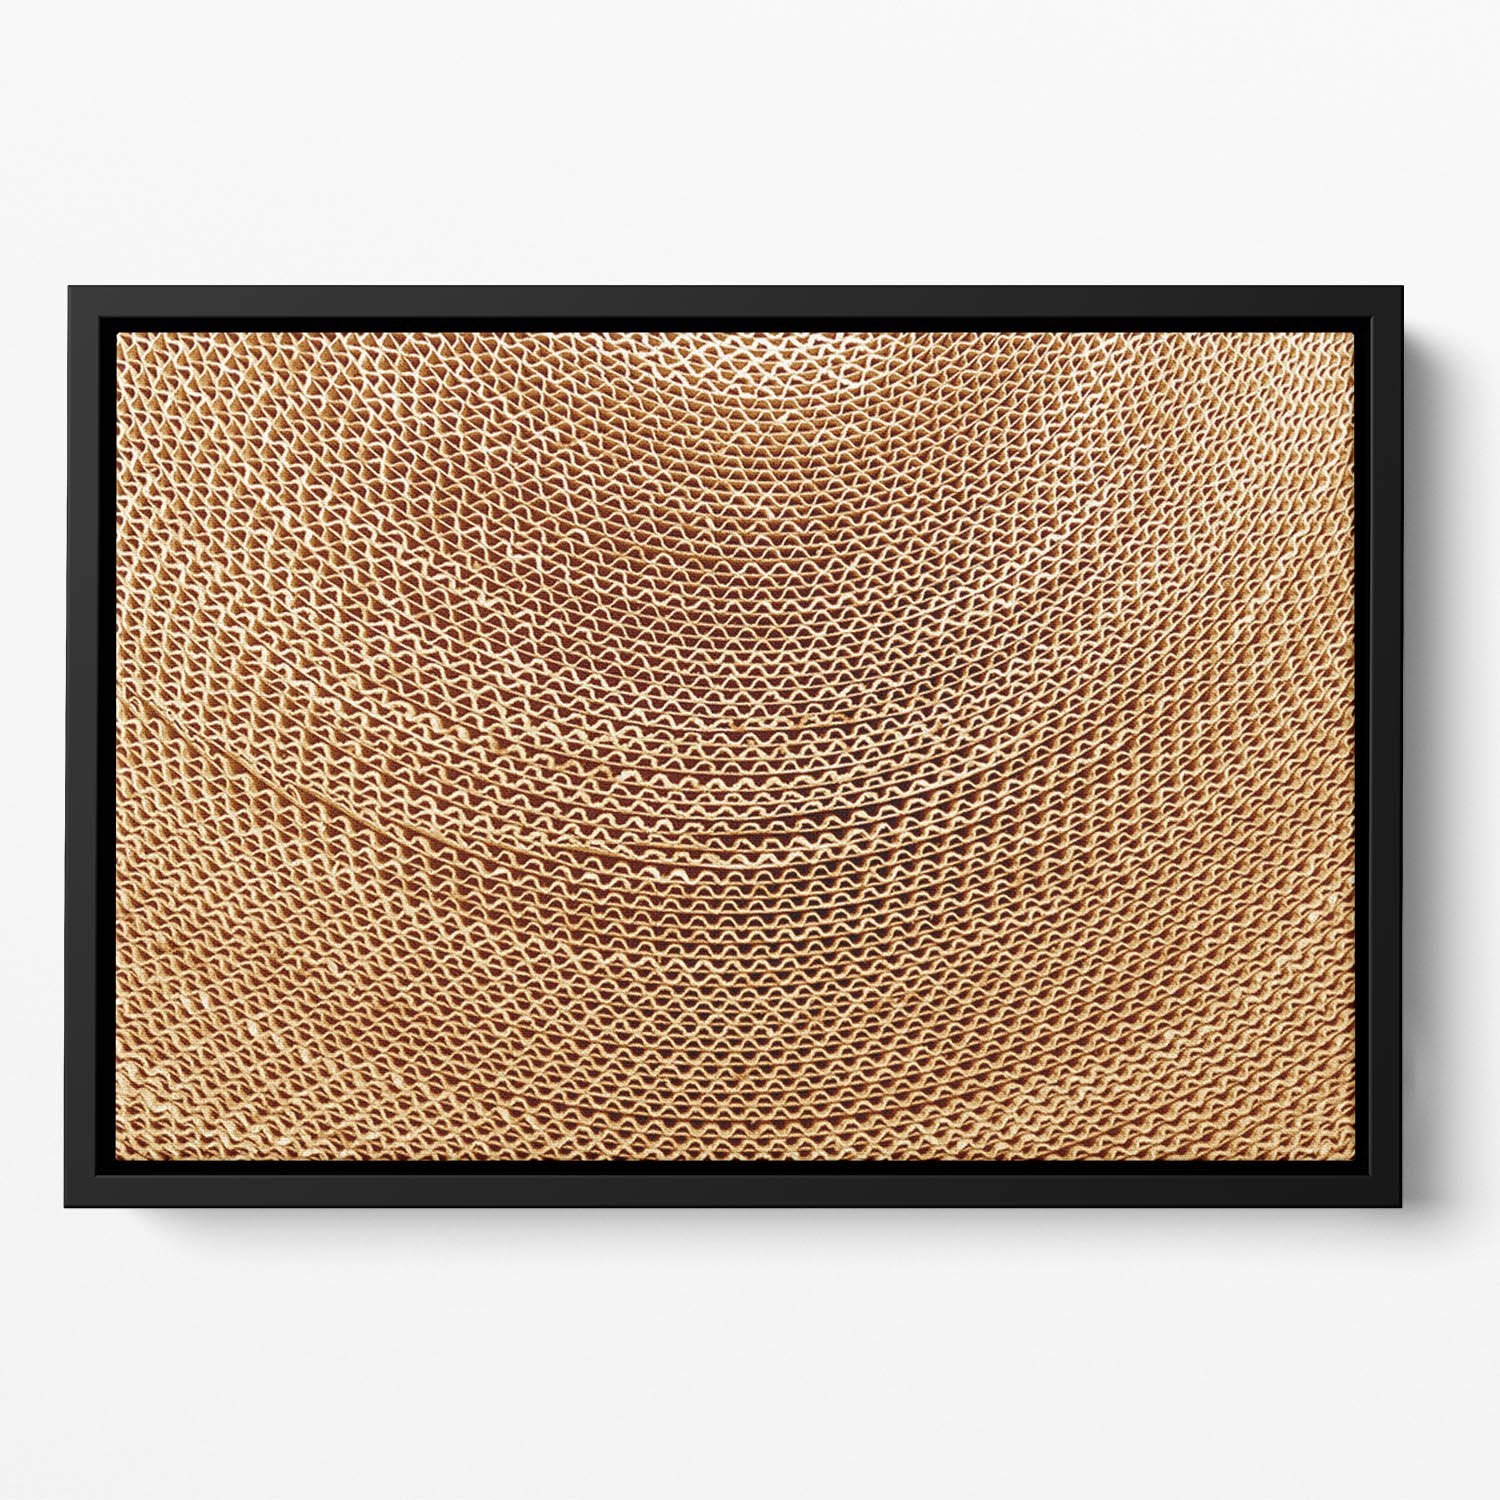 Corrugated cardboard abstract Floating Framed Canvas